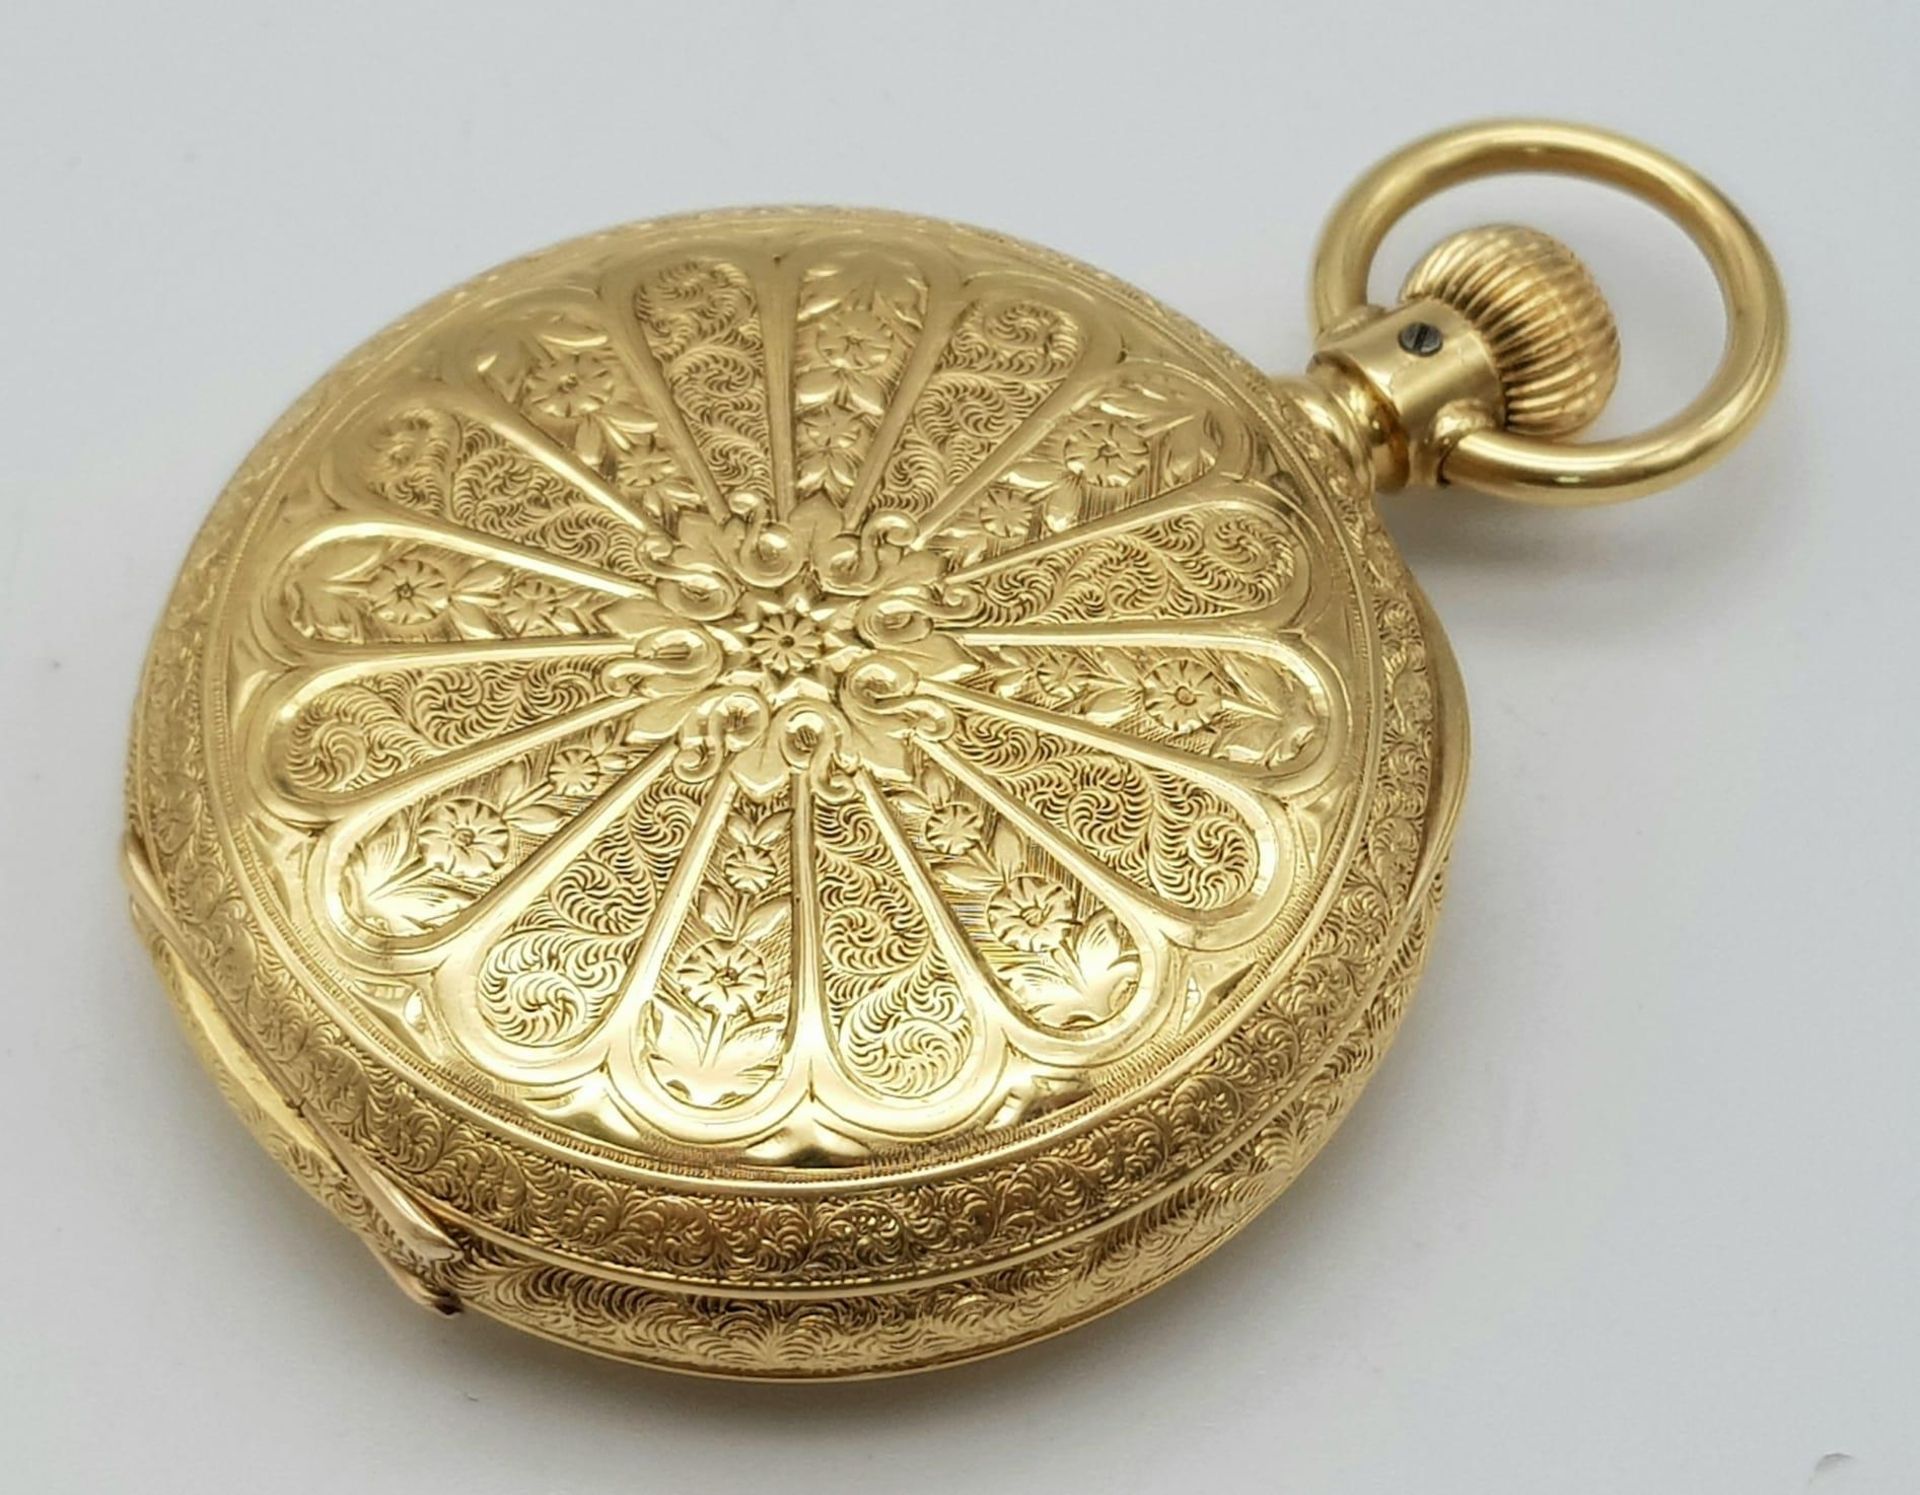 An Antique Waltham 18K Gold Full Hunter Pocket Watch. The case is ornately decorated in a floral - Bild 10 aus 13